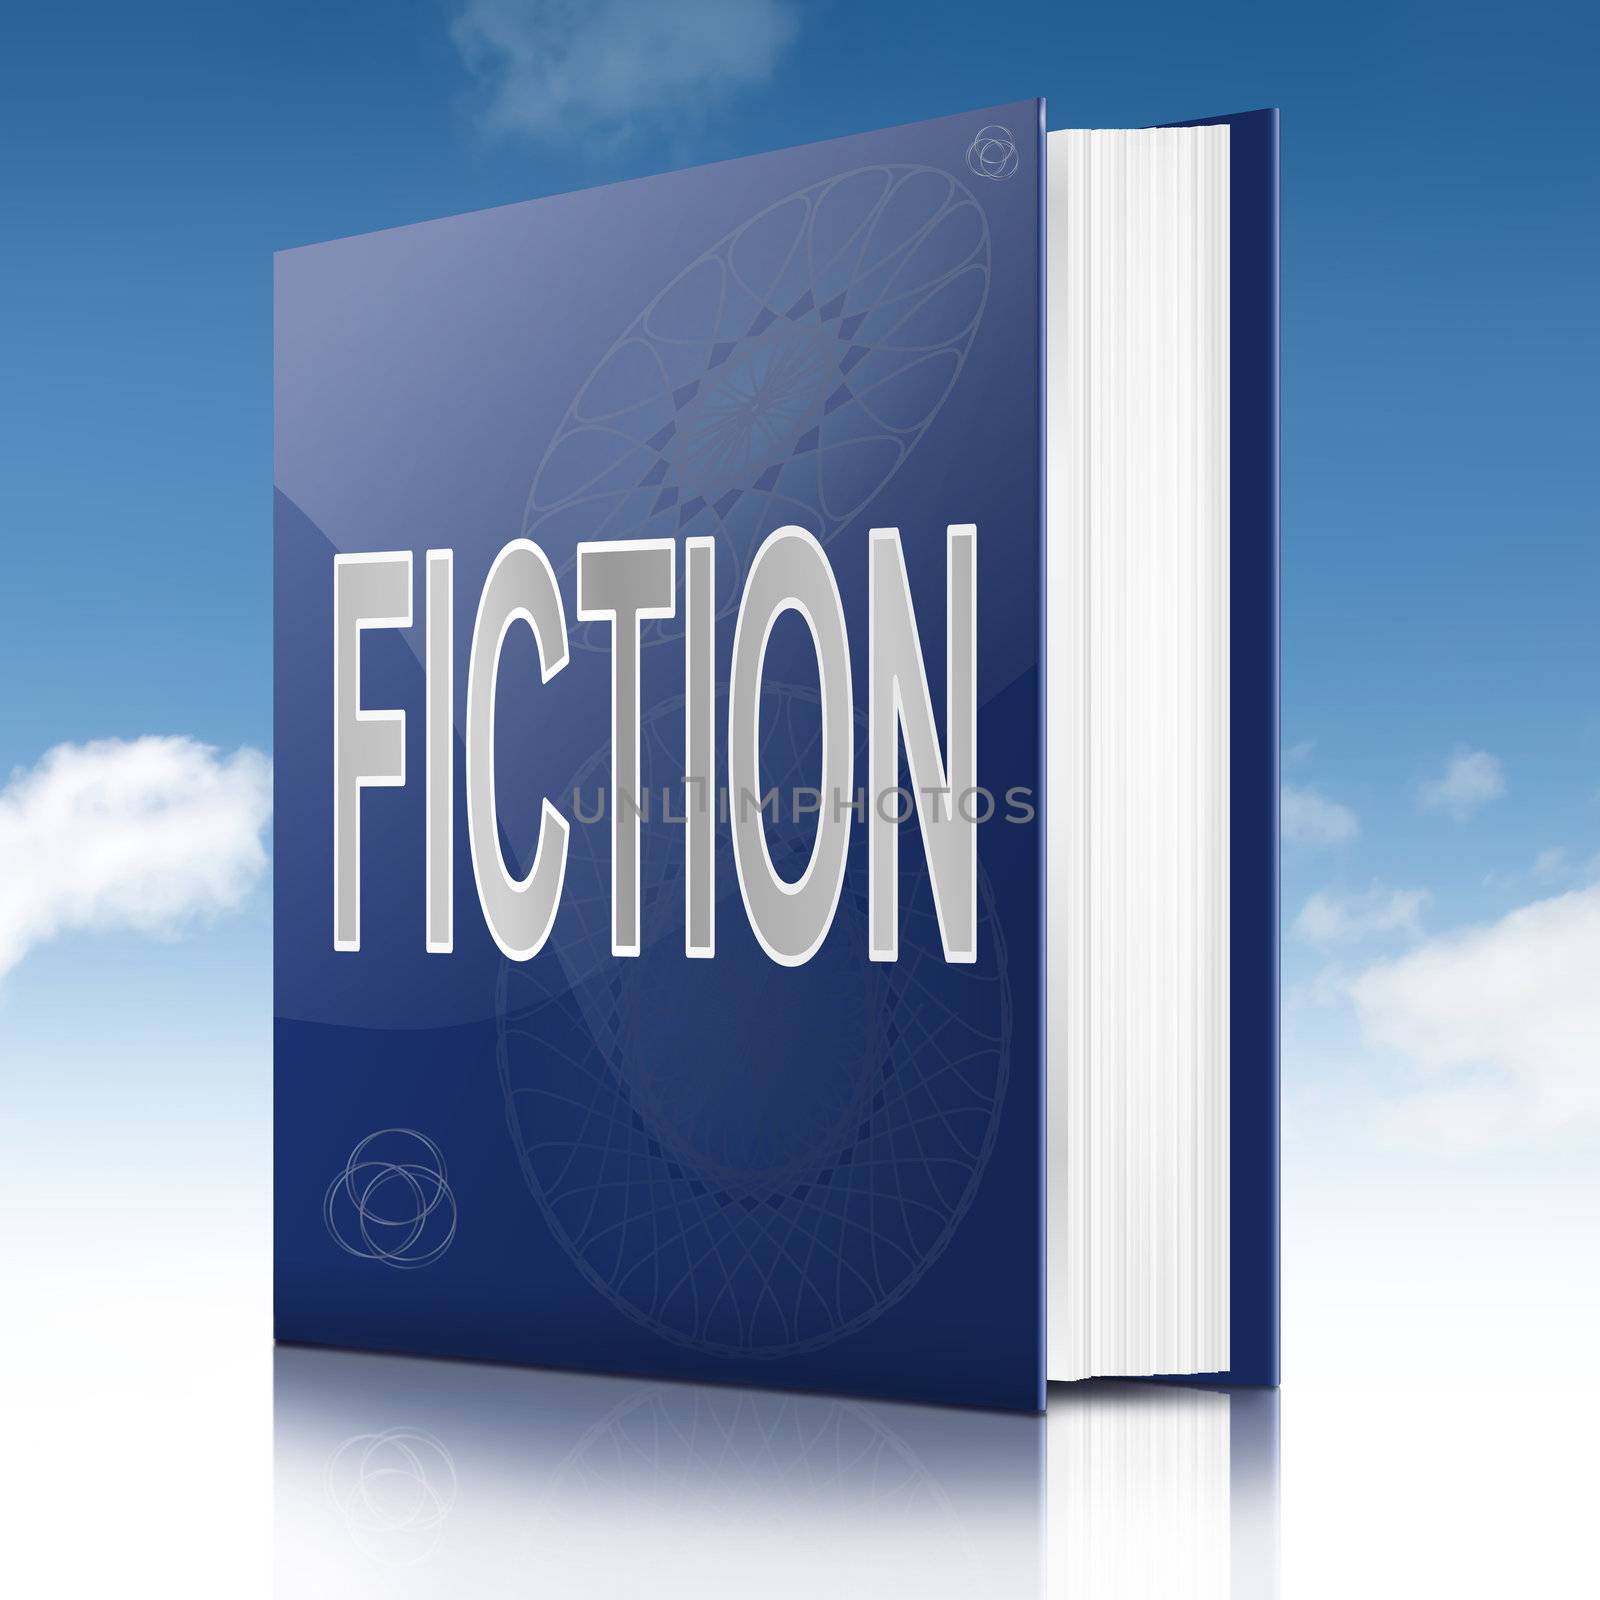 Illustration depicting a book with a fiction concept title. Sky background.